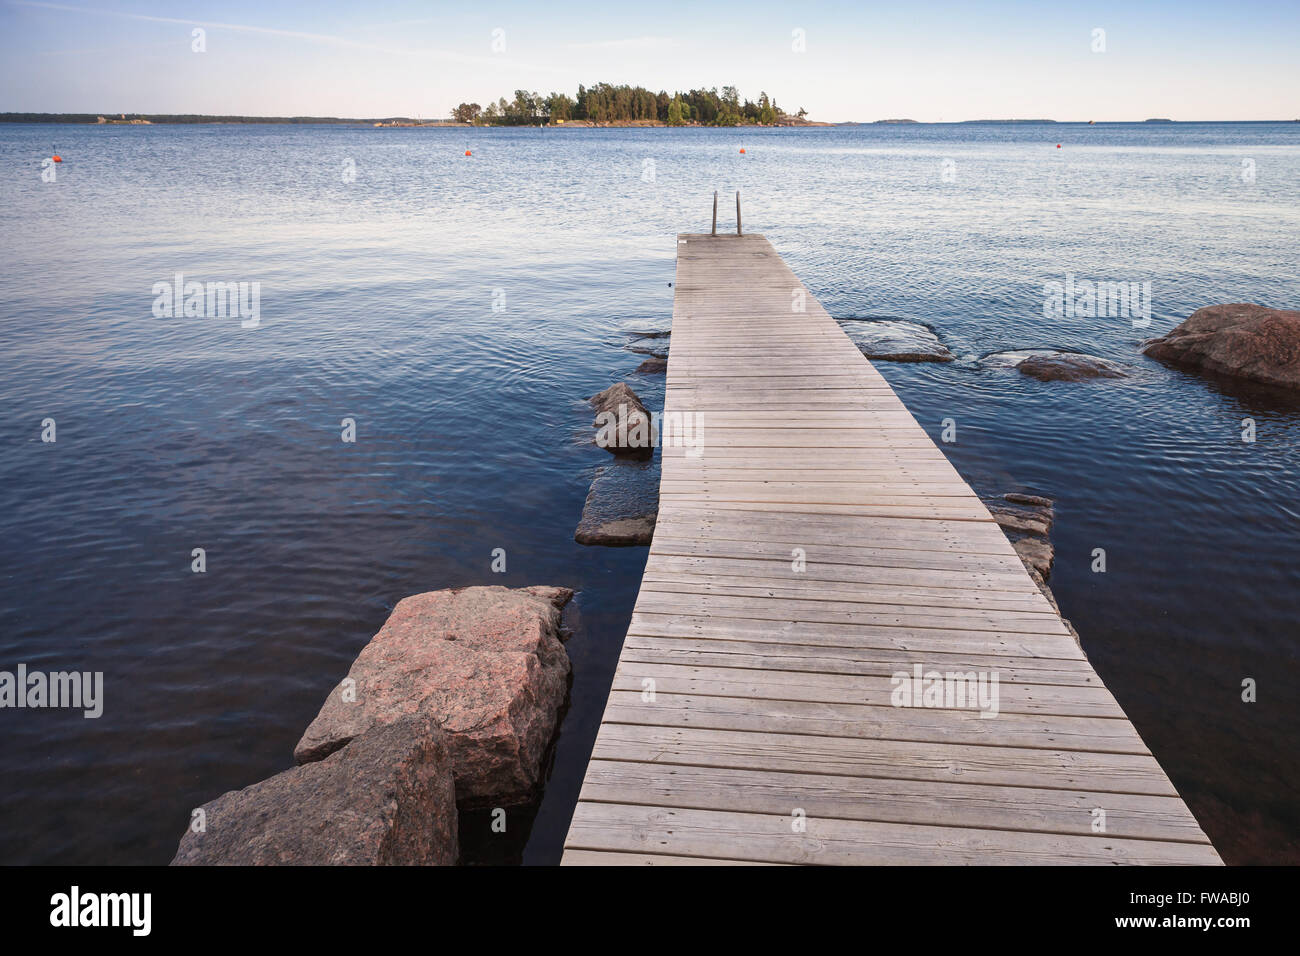 Finnish Saimaa lake landscape with wooden pier for swimming Stock Photo